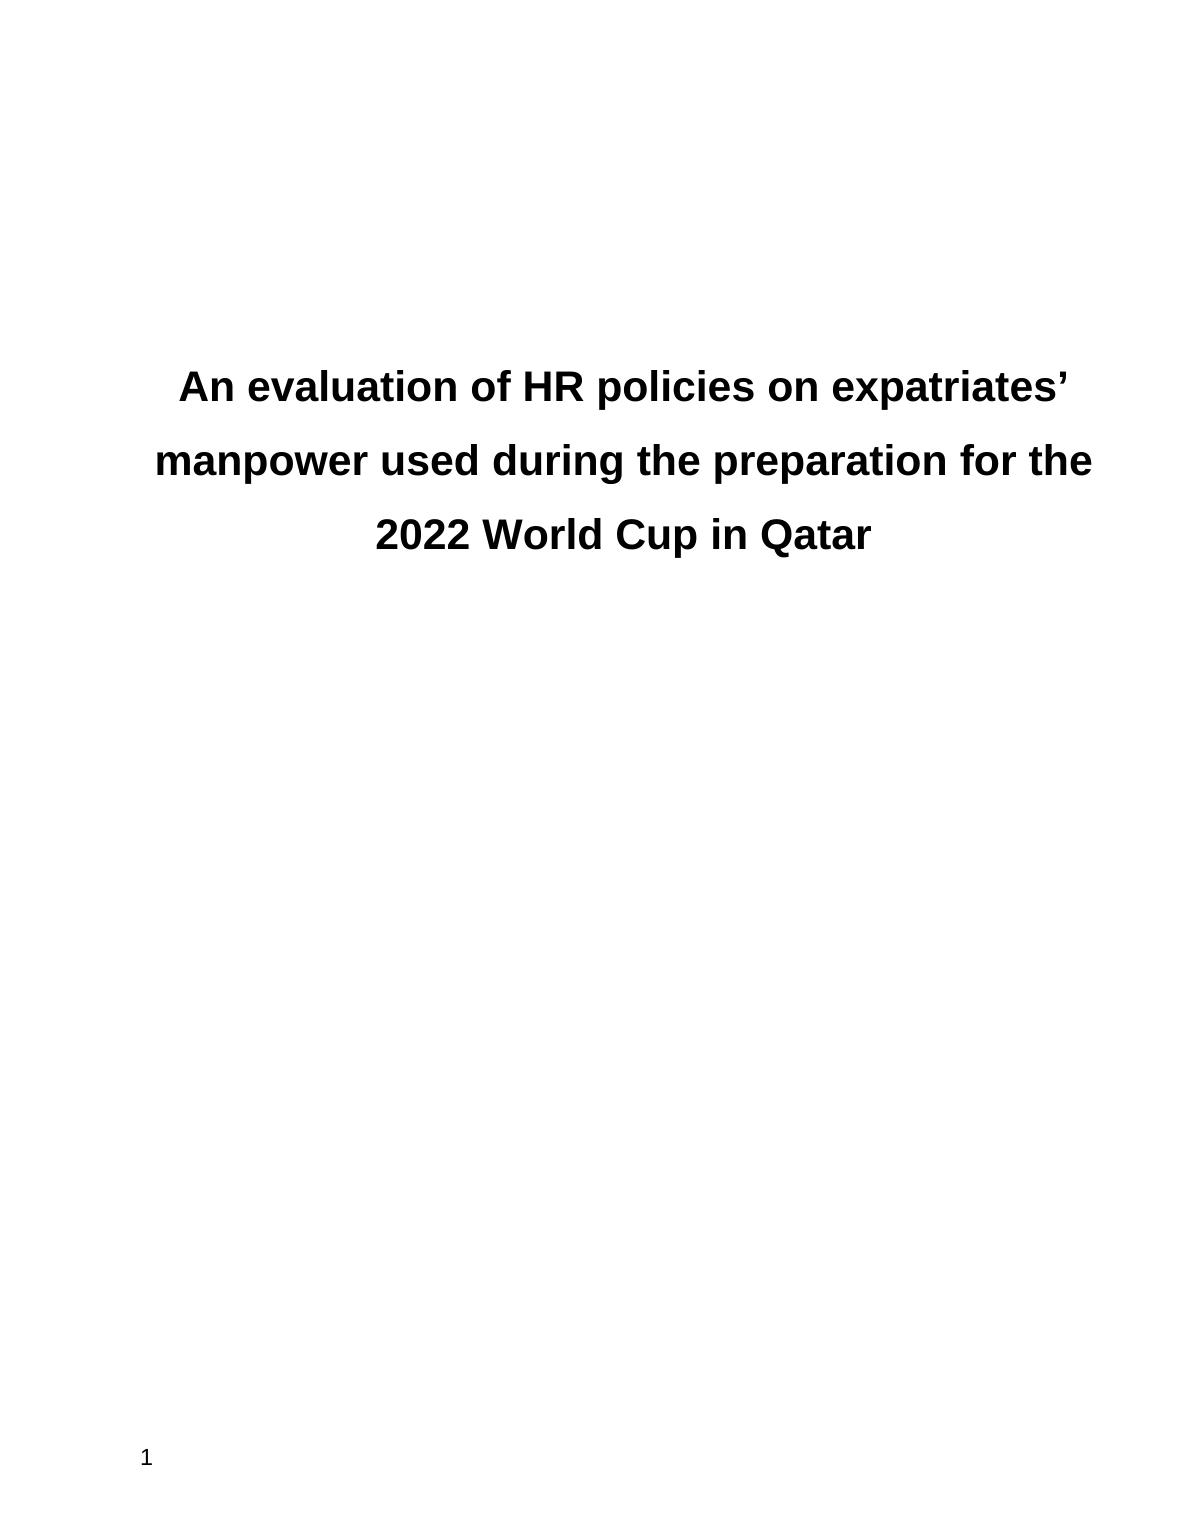 An Evaluation of HR Policies on Expatriates Assignment_1